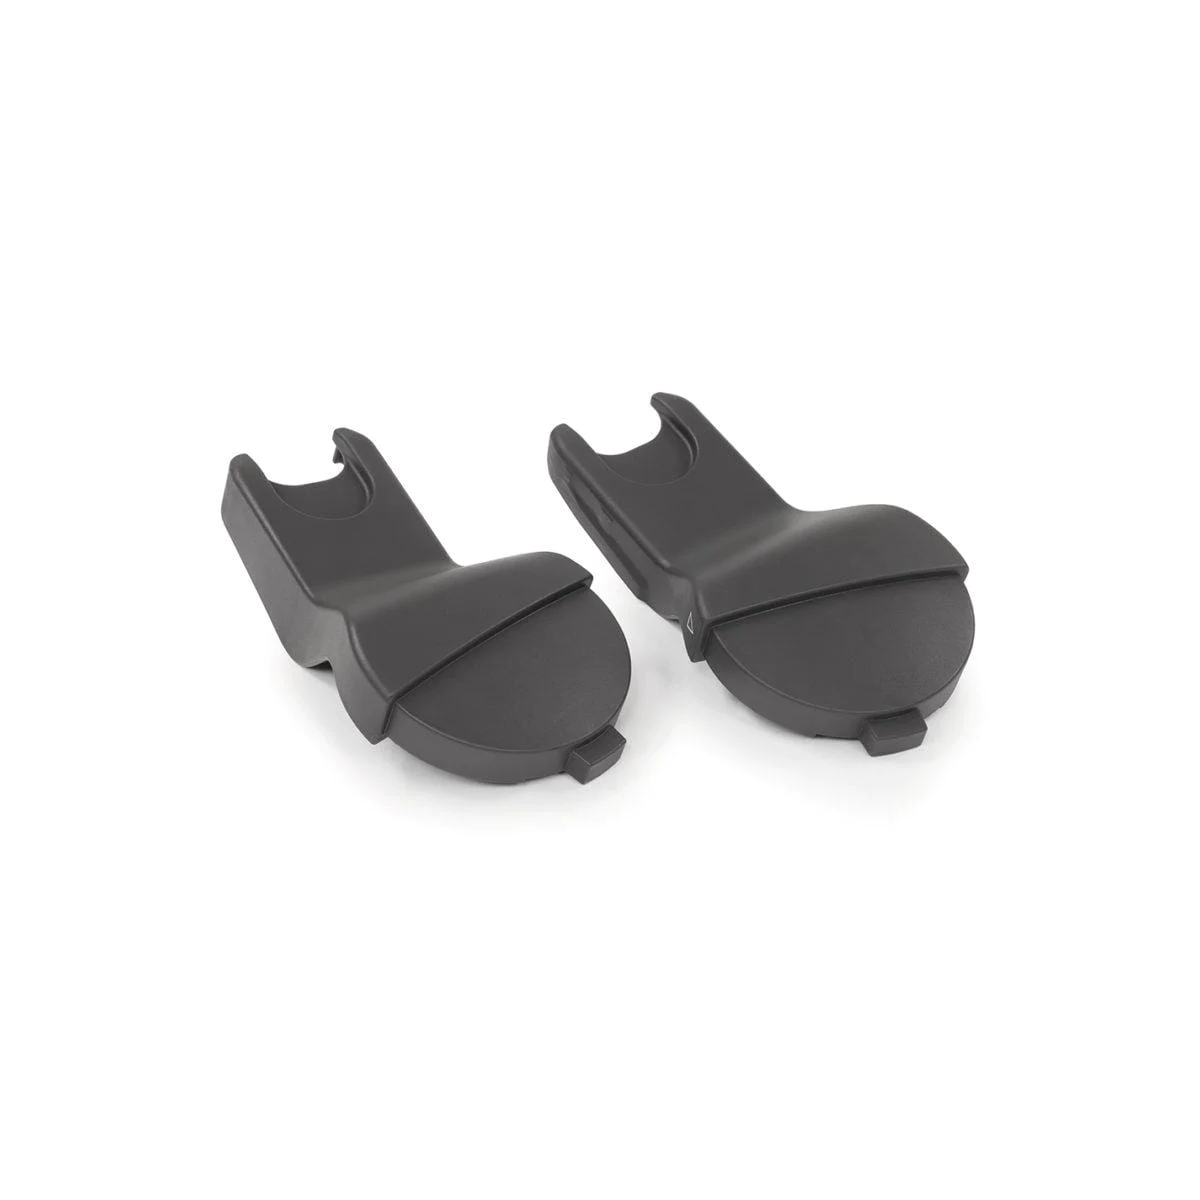 Babystyle Hybrid 2 Multi Car Seat Adapters (CL)